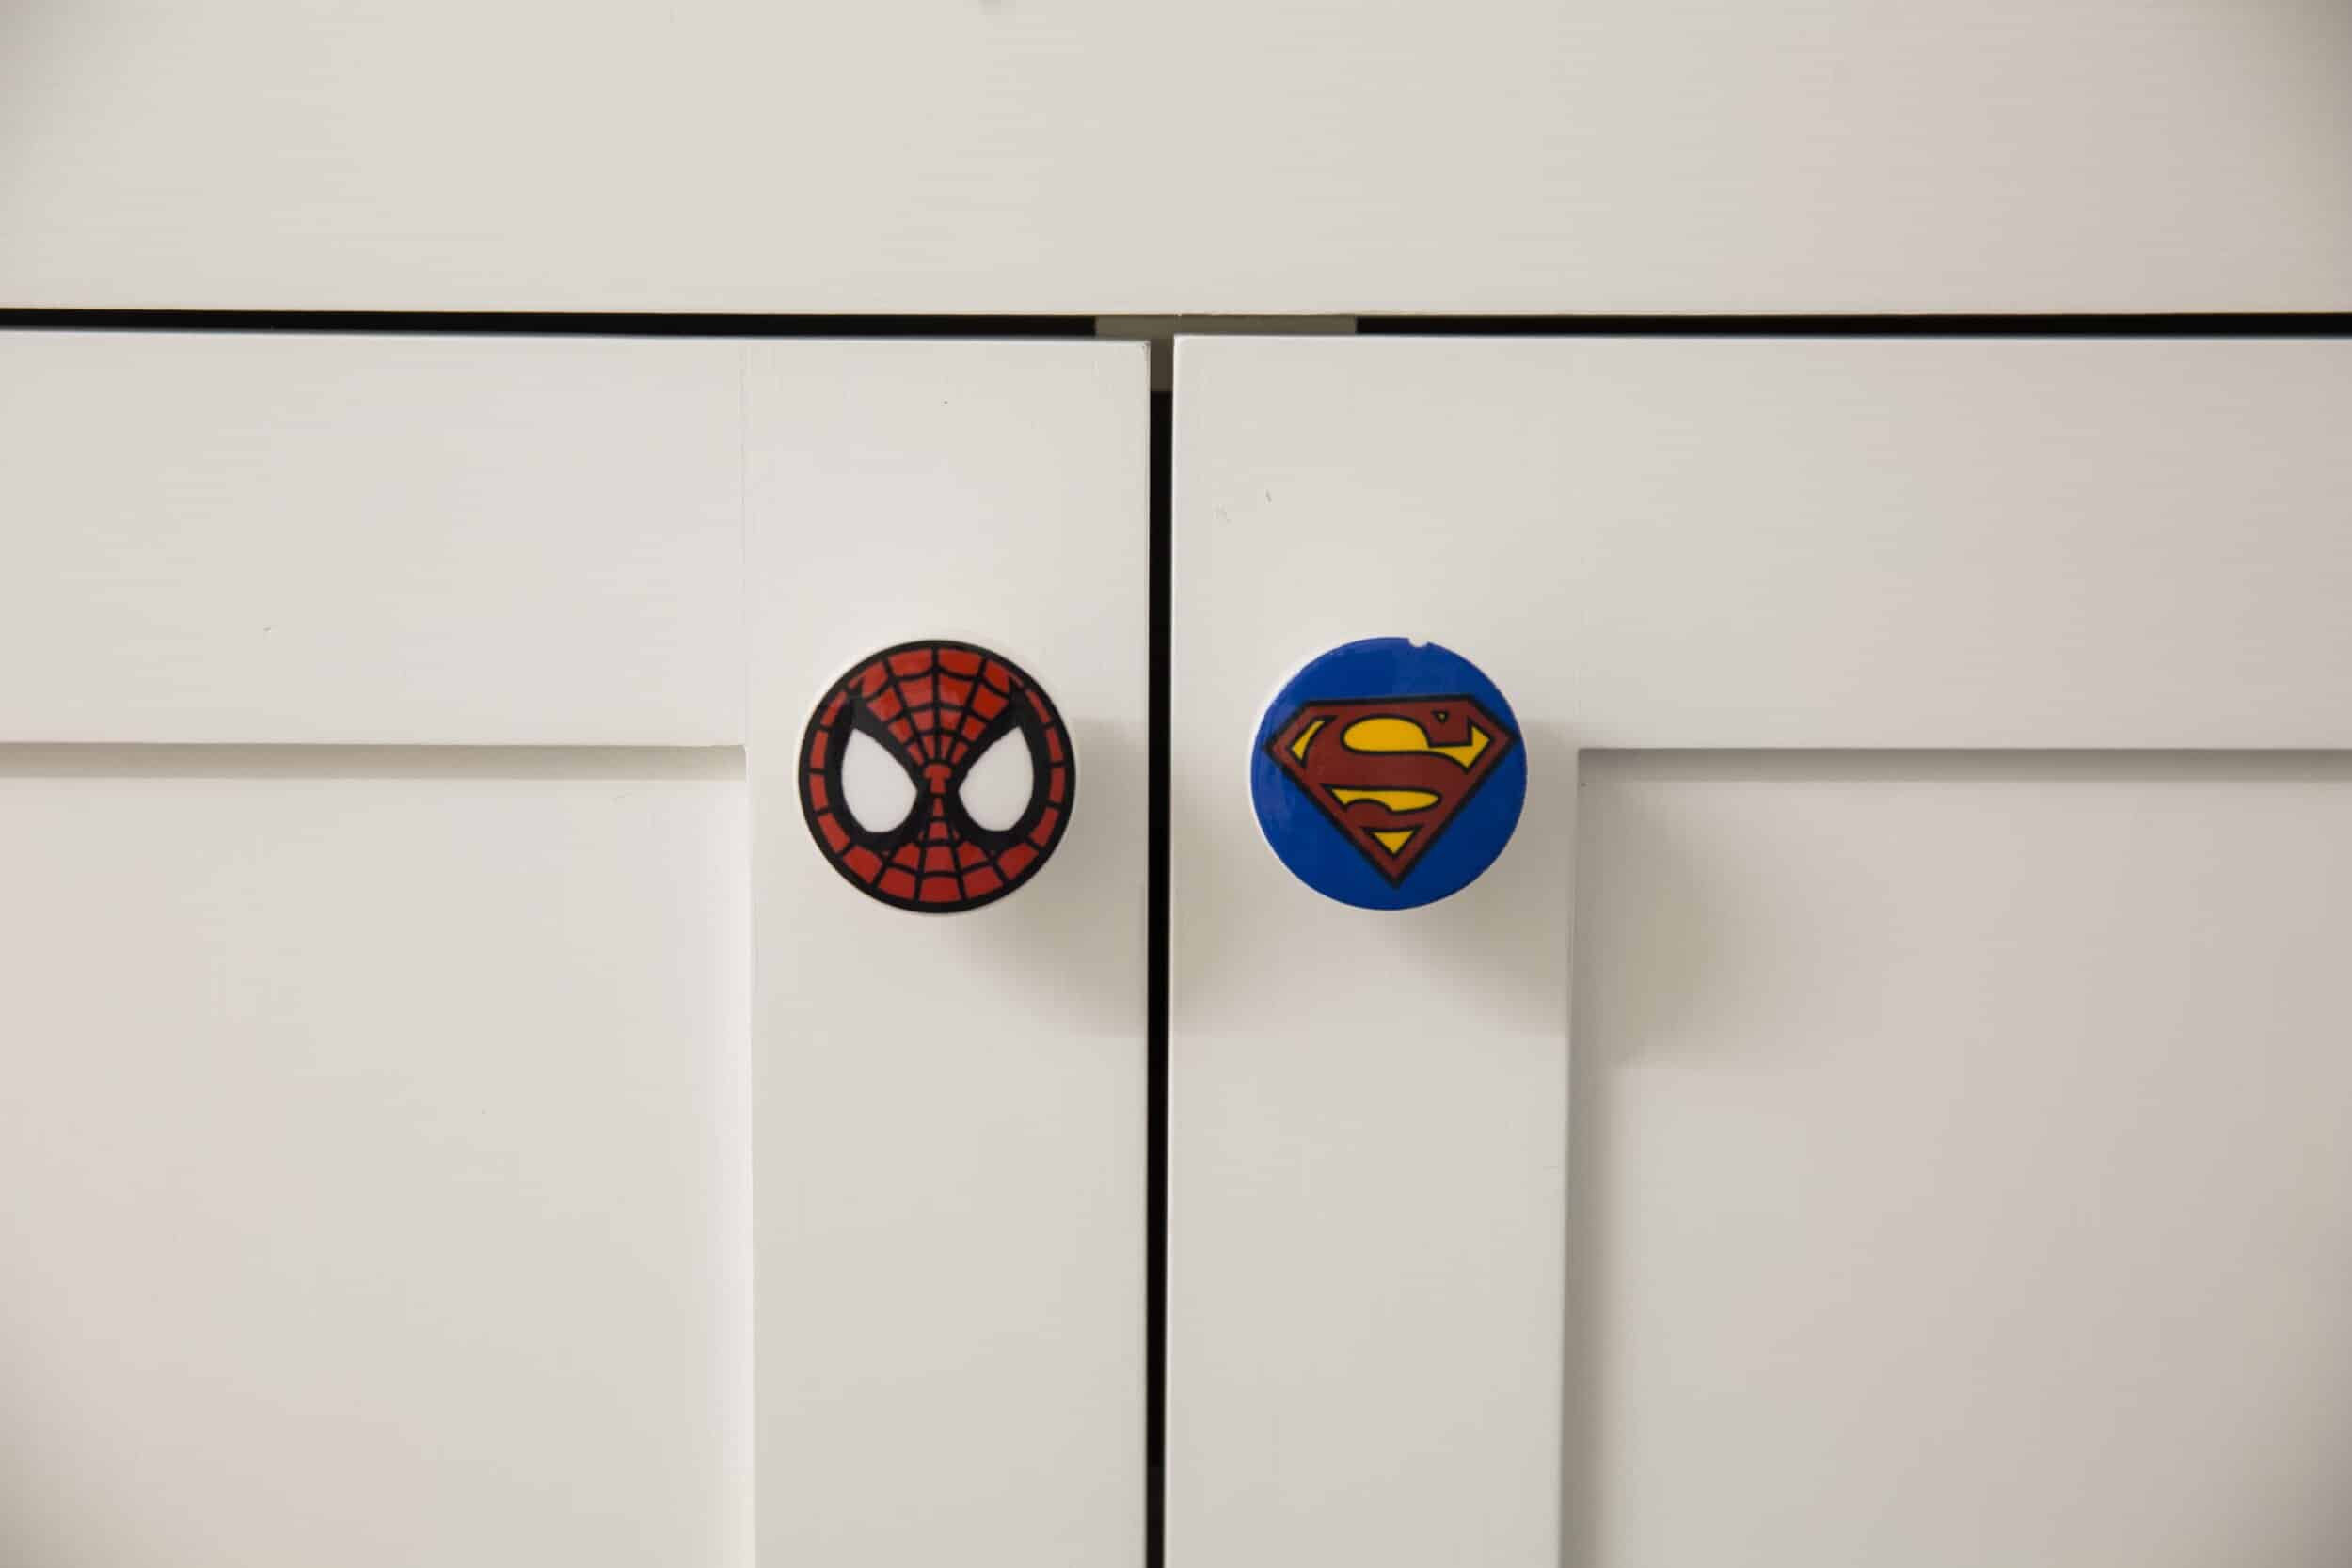 Super hero hardware adds color and “Kapow!”